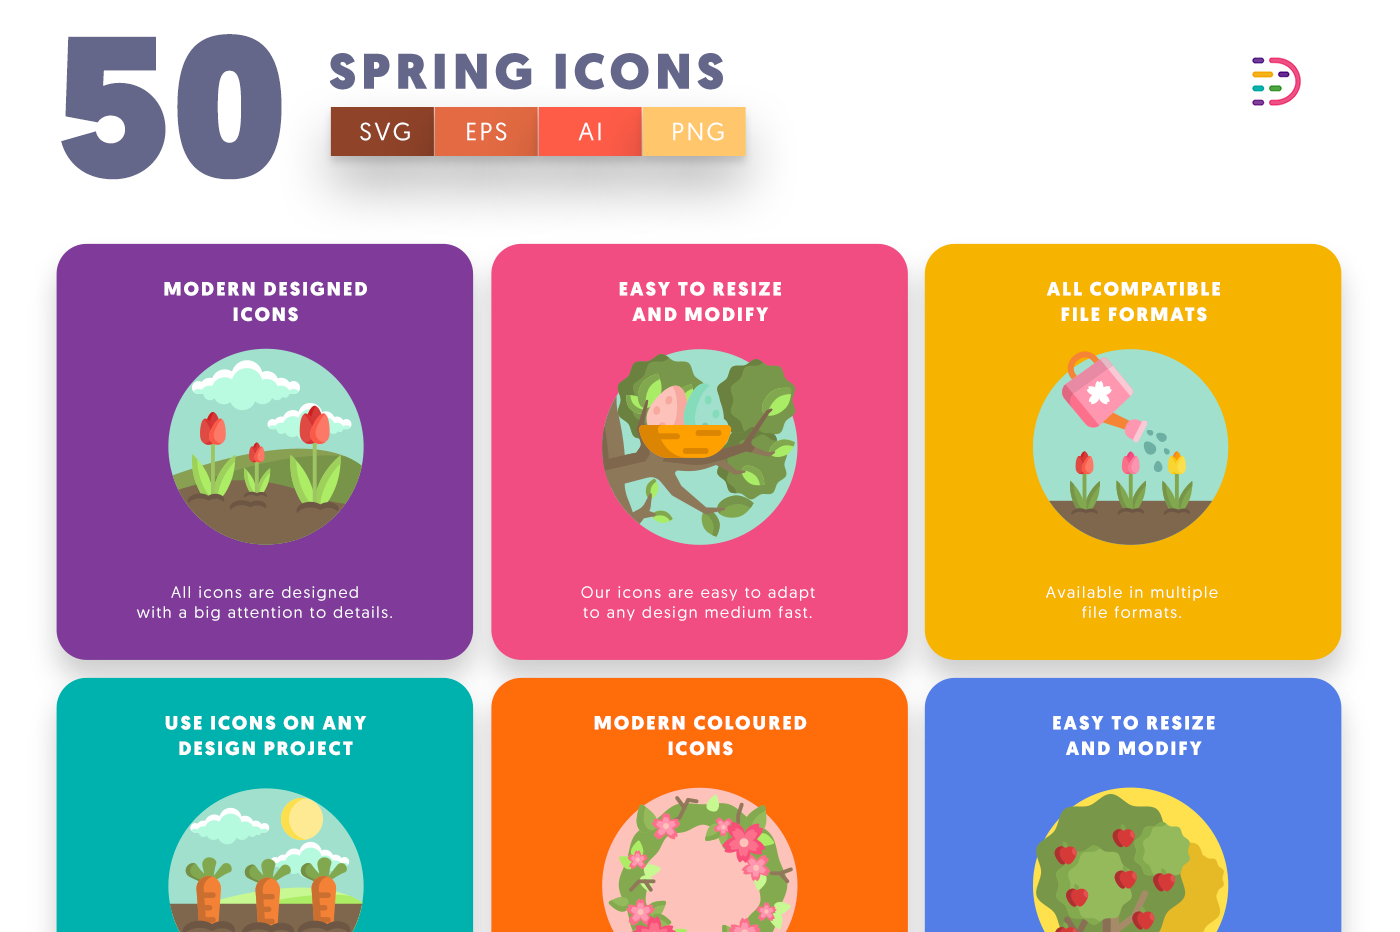 Full vector 50 Spring Icons